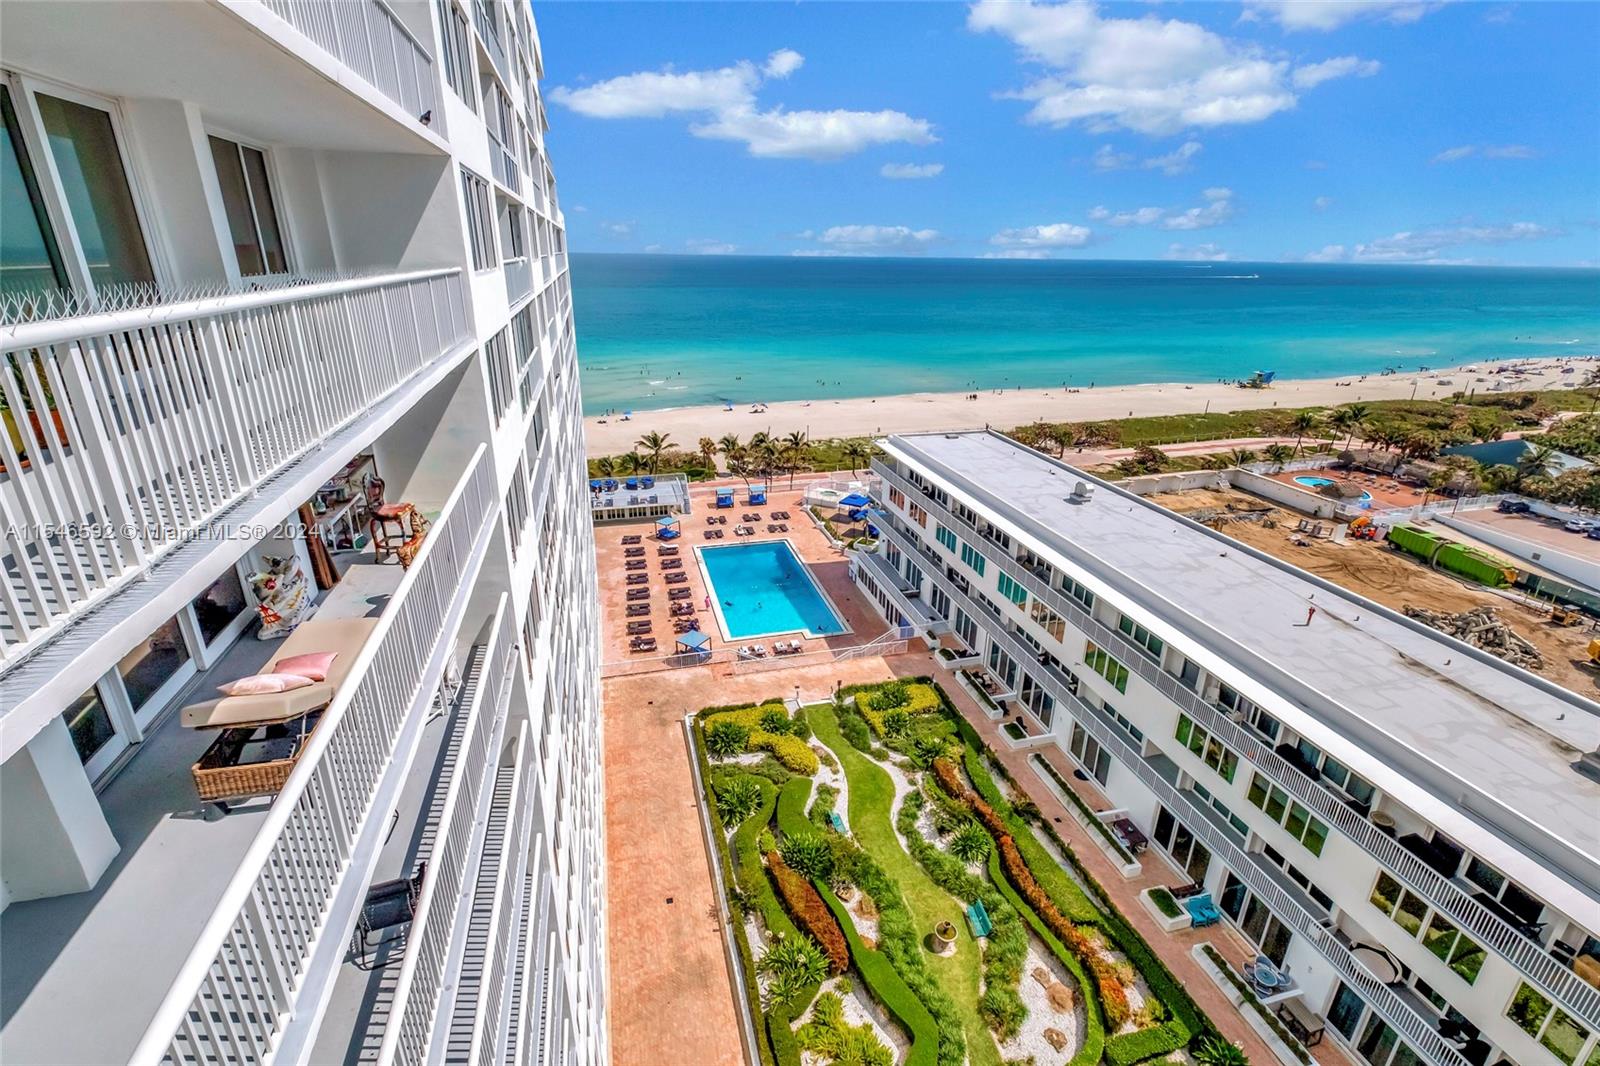 Welcome to our stunning oceanfront 1Bed 1Bath in Miami Beach! This cozy and modern retreat offers access to a private dock and heated pool, and a gym with panoramic ocean views. Available for seasonal and yearly rates furnished and unfurnished. Book now for an extraordinary stay in paradise!